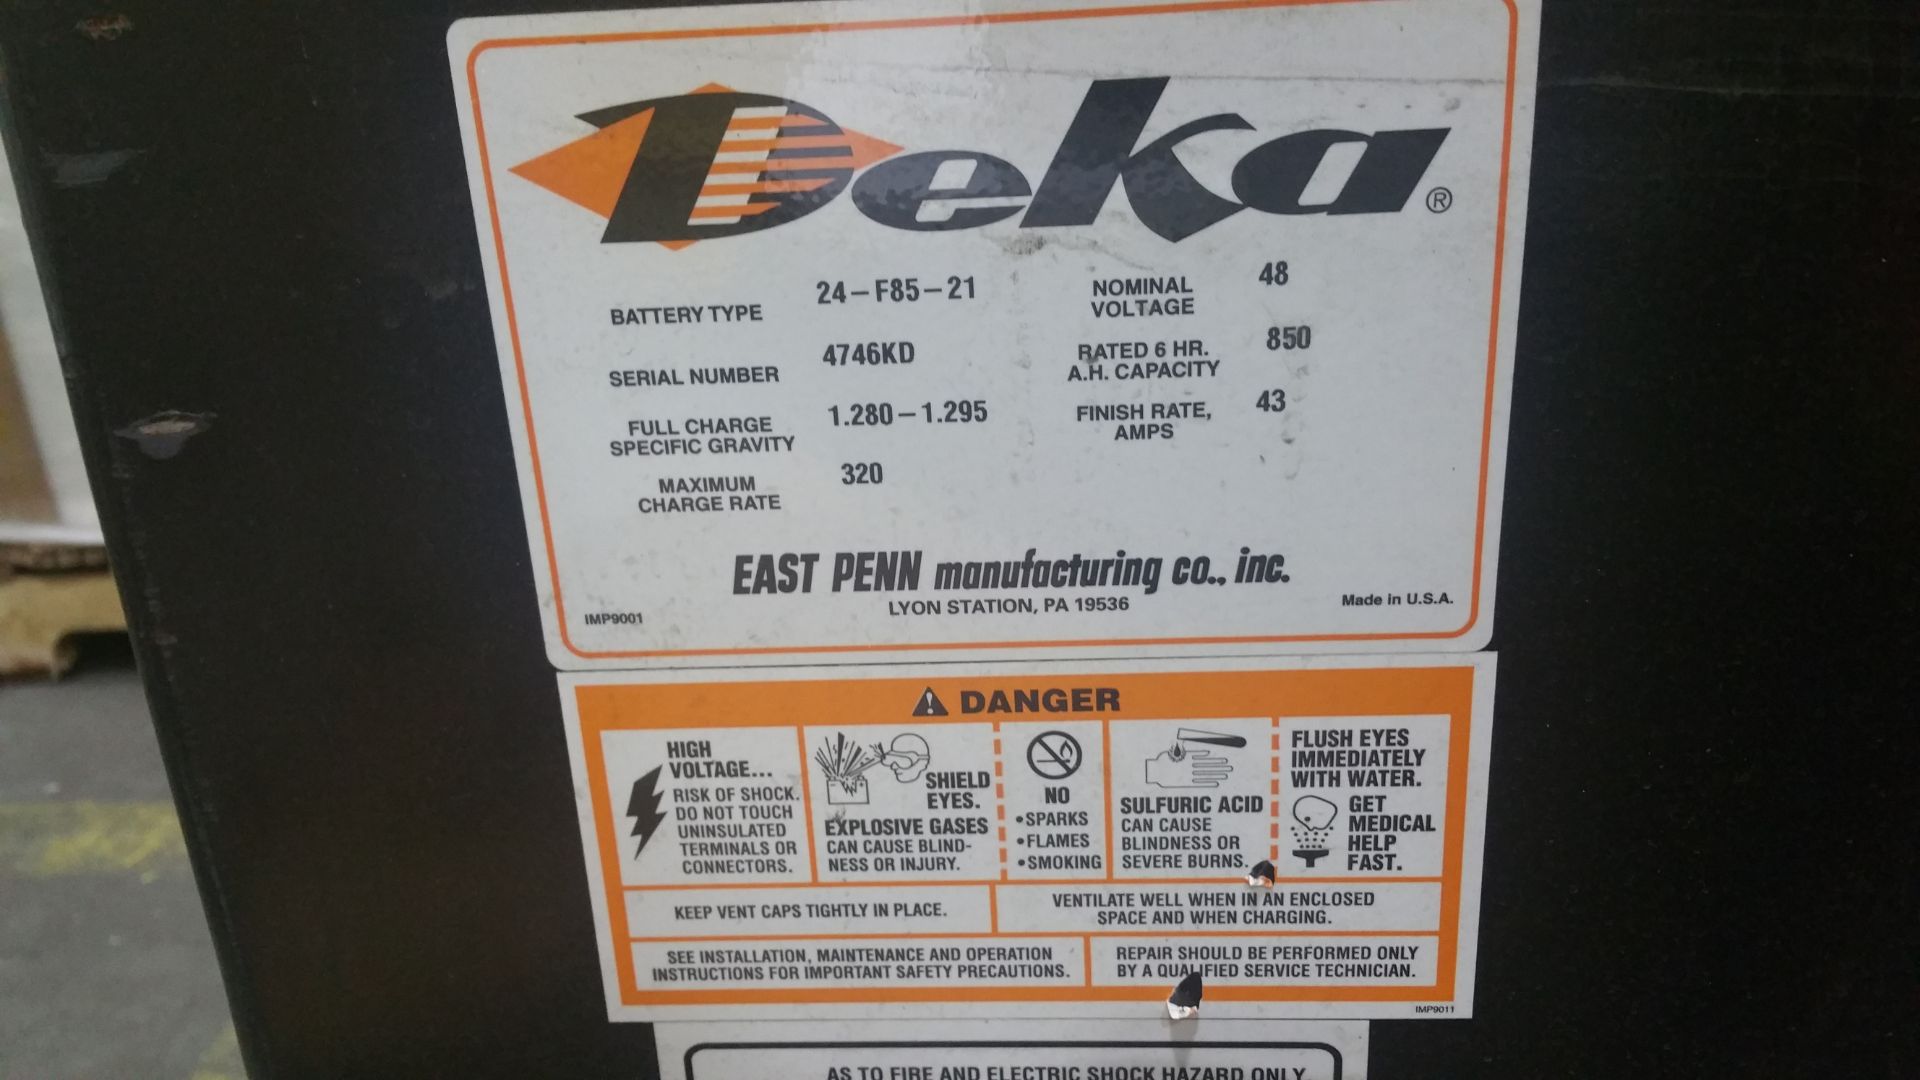 NEW Deka Fast Charge 48V Battery, Never Installed, 33” x 38” x 22”,Tagged lot 9 (Located in Indi - Image 2 of 3